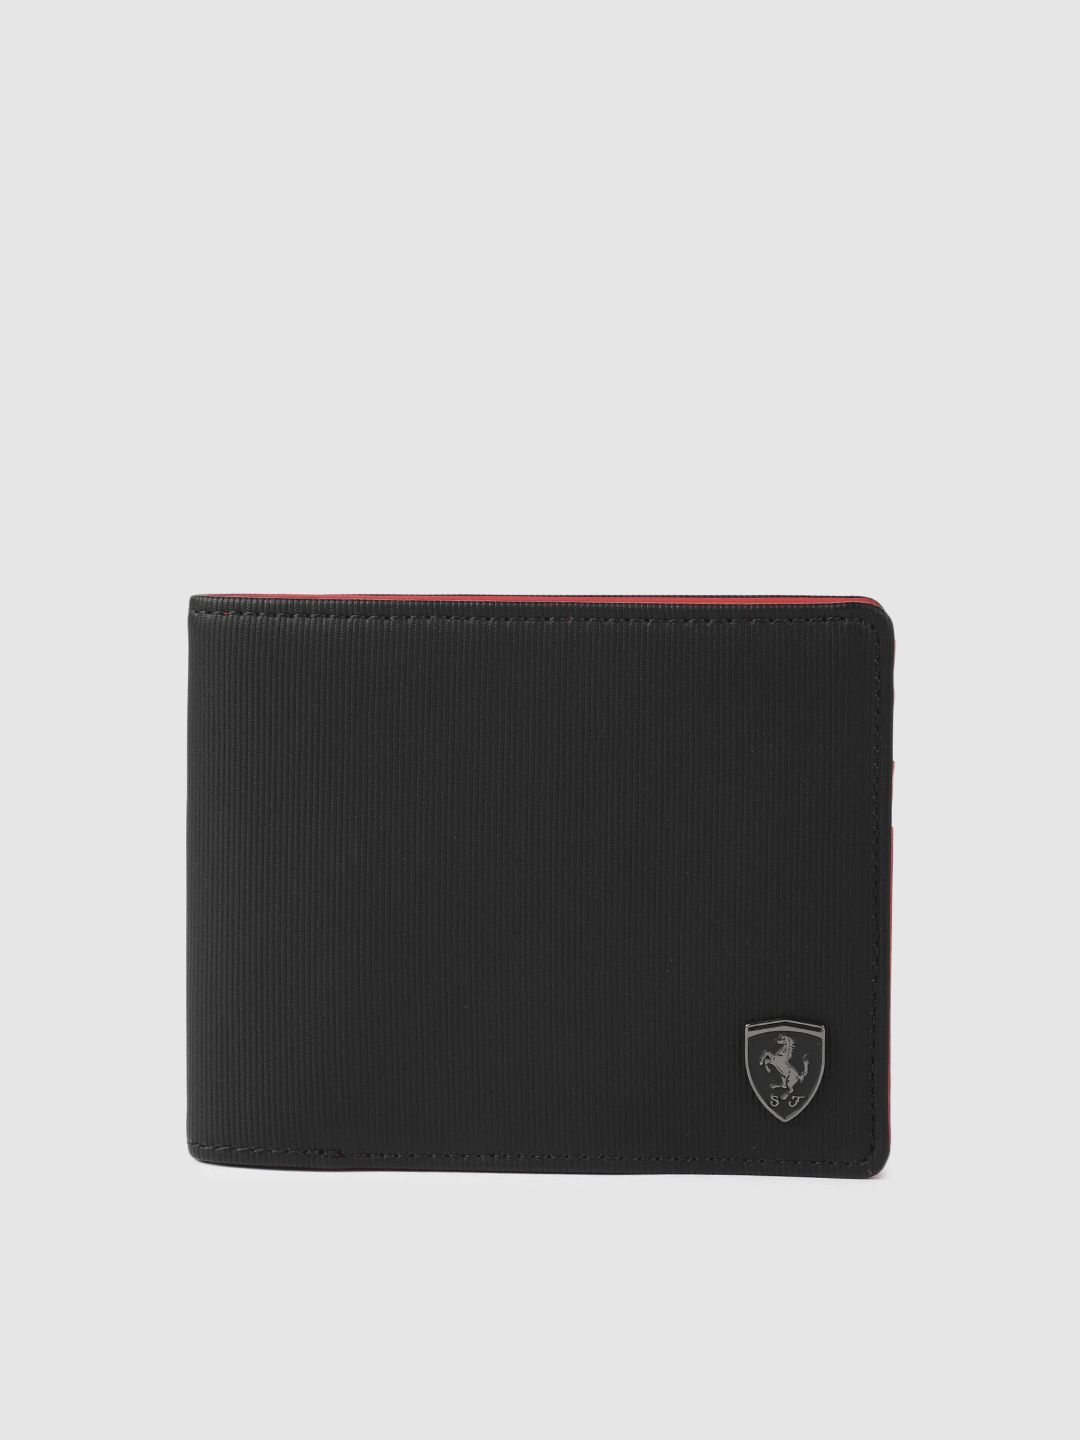 Puma Unisex Black Solid Two Fold Wallet Price in India